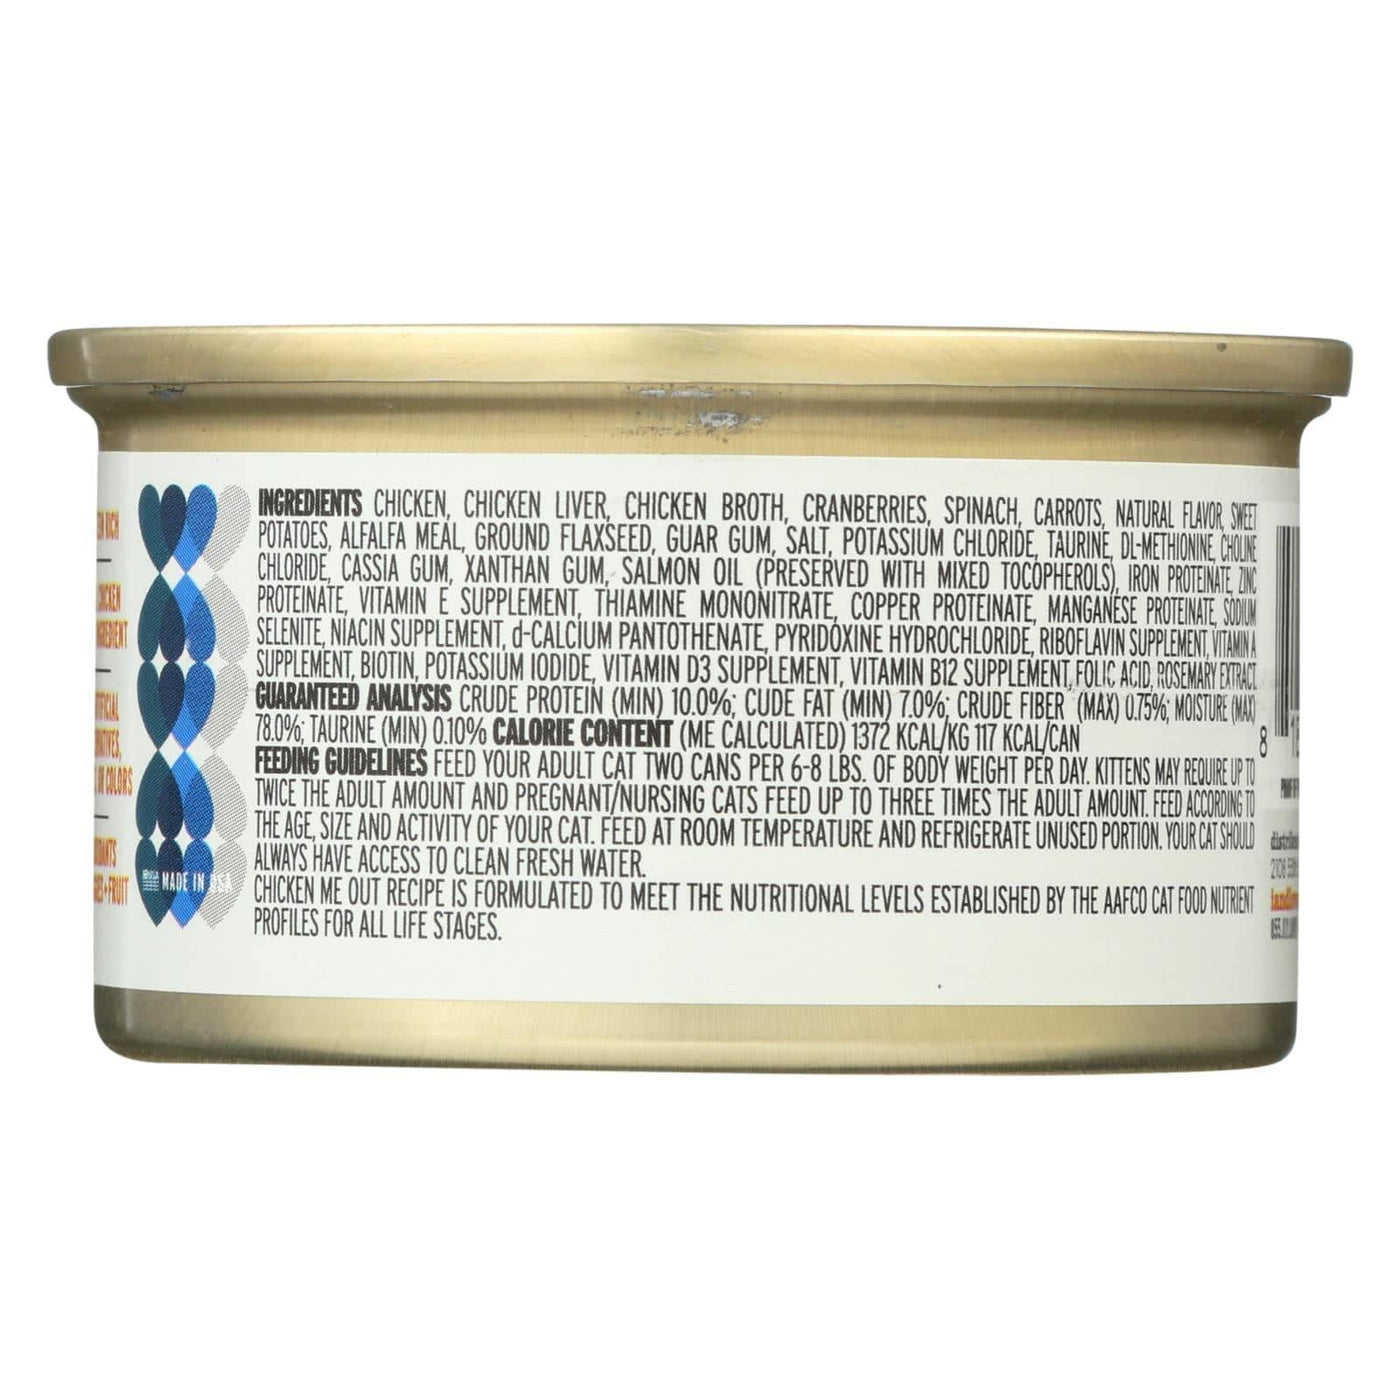 Buy I And Love And You Chicken Me Out - Wet Food - Case Of 24 - 3 Oz.  at OnlyNaturals.us